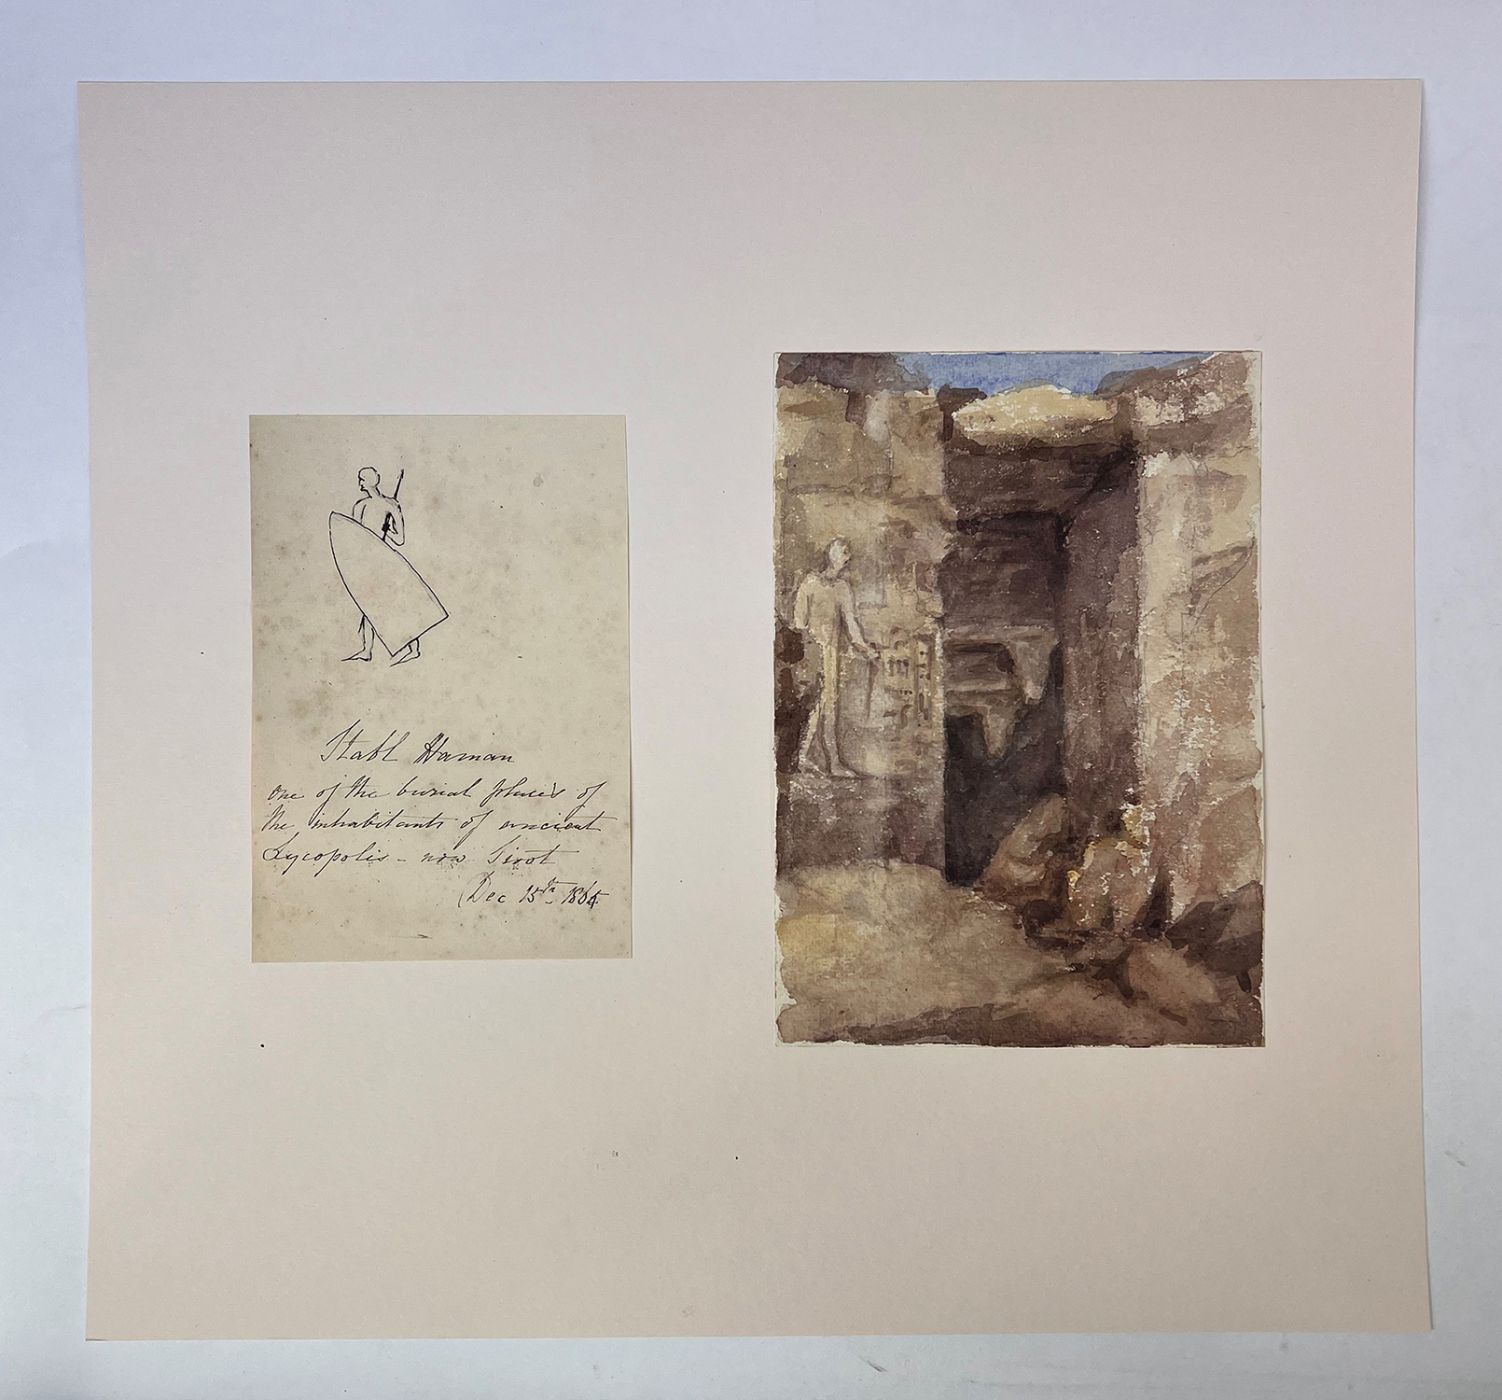 A FINE COLLECTION OF TWENTY-SEVEN EARLY WATERCOLOUR VIEWS OF THE NILE, PRODUCED DURING A WINTER CRUISE IN 1864-65, DEPICTING THE ANCIENT SITES AND LANDSCAPES OF UPPER EGYPT, NUBIA, AND THE SECOND CATARACT -  image 4